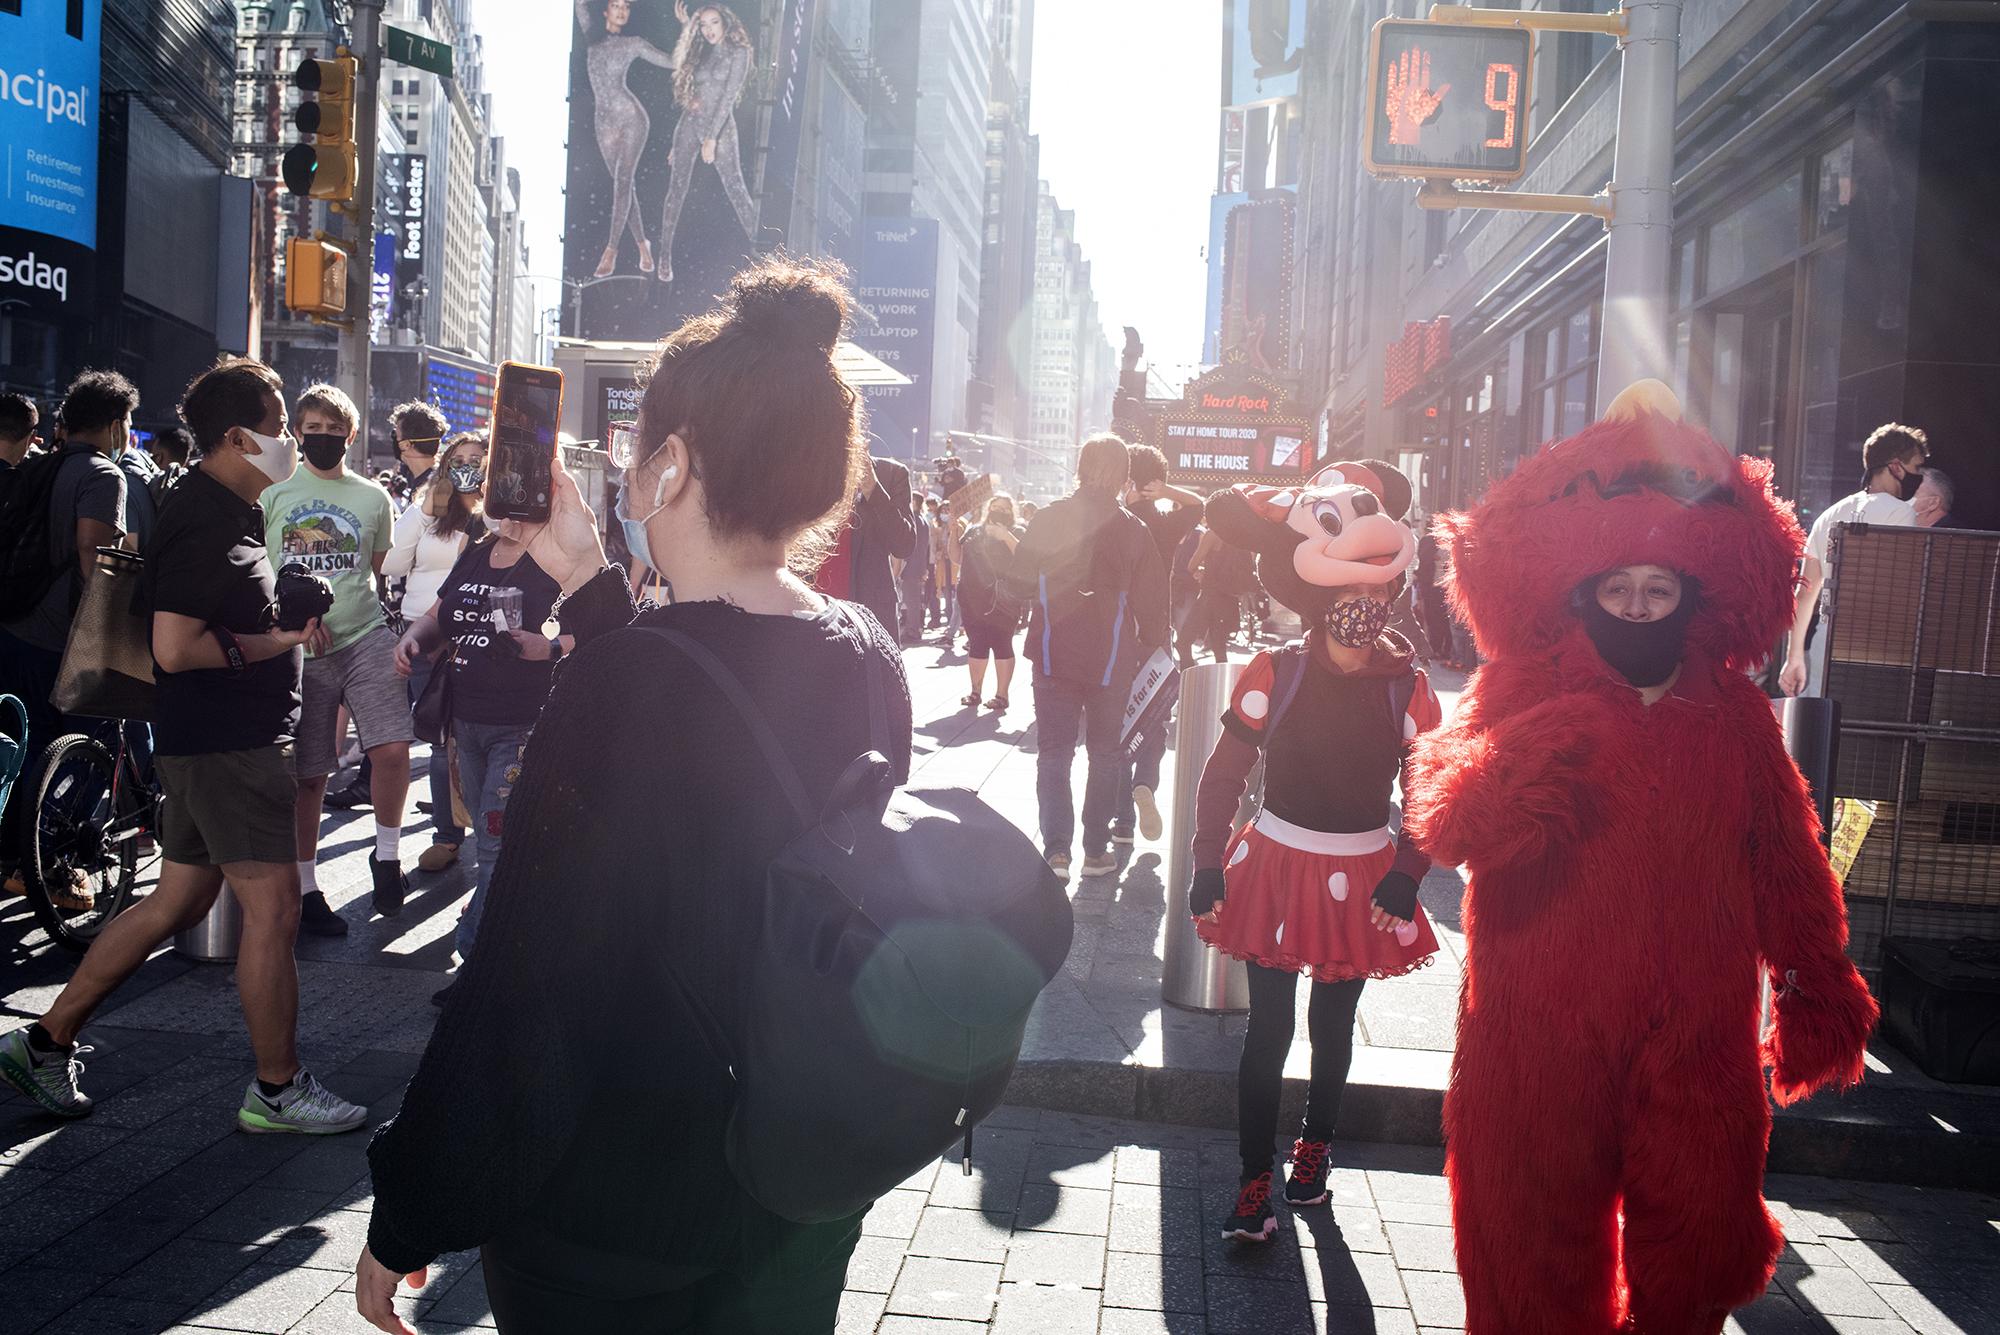 Where is Mickey? Covid-19  -  People gather in Times Square to celebrate election of...